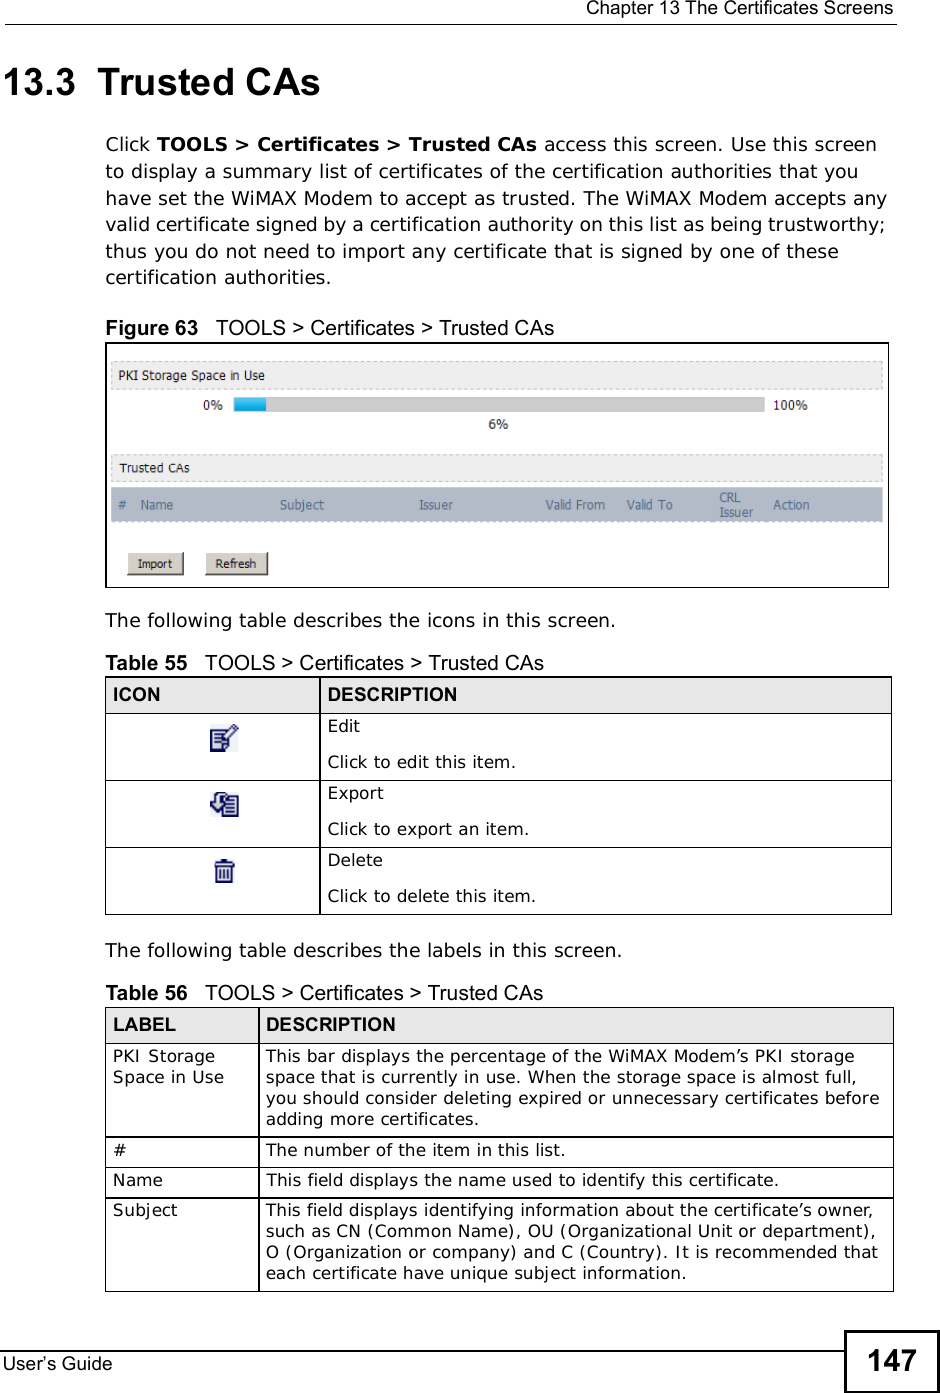  Chapter 13The Certificates ScreensUser s Guide 14713.3  Trusted CAsClick TOOLS &gt; Certificates &gt;Trusted CAs access this screen. Use this screen to display a summary list of certificates of the certification authorities that you have set the WiMAX Modem to accept as trusted. The WiMAX Modem accepts any valid certificate signed by a certification authority on this list as being trustworthy; thus you do not need to import any certificate that is signed by one of these certification authorities. Figure 63   TOOLS &gt; Certificates &gt; Trusted CAsThe following table describes the icons in this screen.The following table describes the labels in this screen. Table 55   TOOLS &gt; Certificates &gt; Trusted CAsICON DESCRIPTIONEditClick to edit this item.ExportClick to export an item.DeleteClick to delete this item.Table 56   TOOLS &gt; Certificates &gt; Trusted CAsLABEL DESCRIPTIONPKI Storage Space in Use This bar displays the percentage of the WiMAX Modem’s PKI storage space that is currently in use. When the storage space is almost full, you should consider deleting expired or unnecessary certificates before adding more certificates.#The number of the item in this list.NameThis field displays the name used to identify this certificate. SubjectThis field displays identifying information about the certificate’s owner, such as CN (Common Name), OU (Organizational Unit or department), O (Organization or company) and C (Country). It is recommended that each certificate have unique subject information.